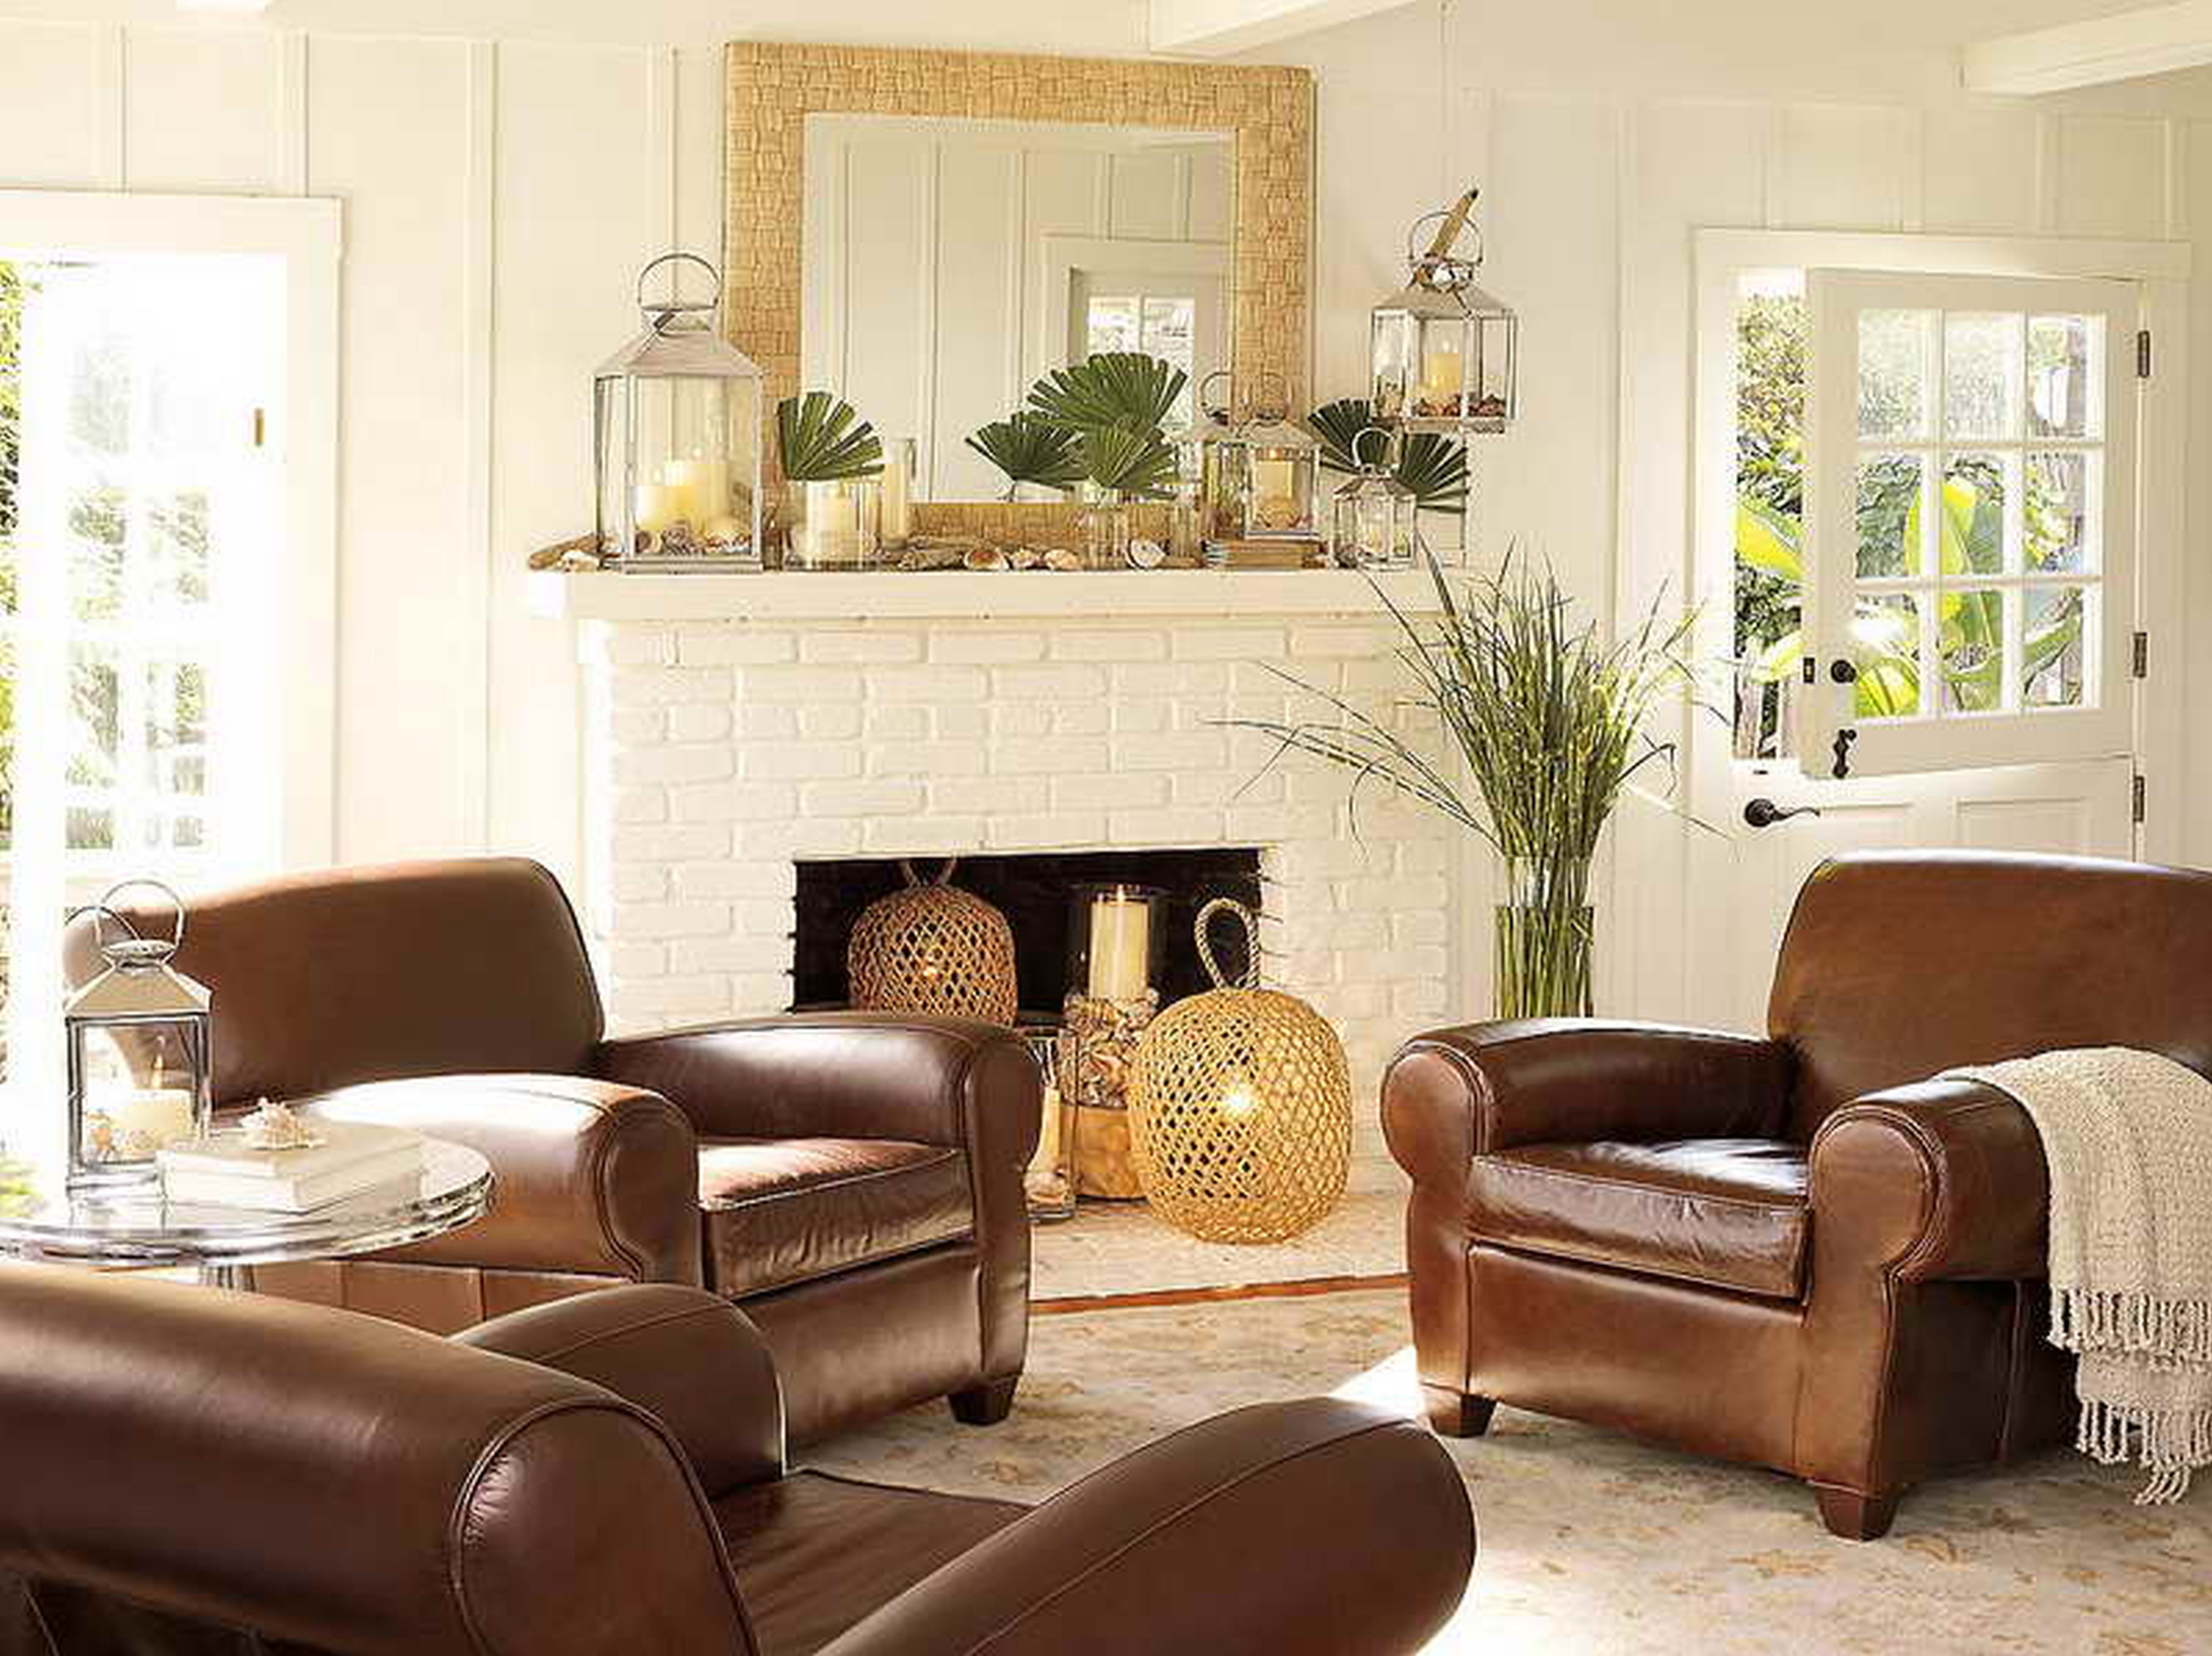 decor brown decorating furniture inexpensive color leather living sofa walls room dark fireplace good decoration rooms paint colors designs mantel